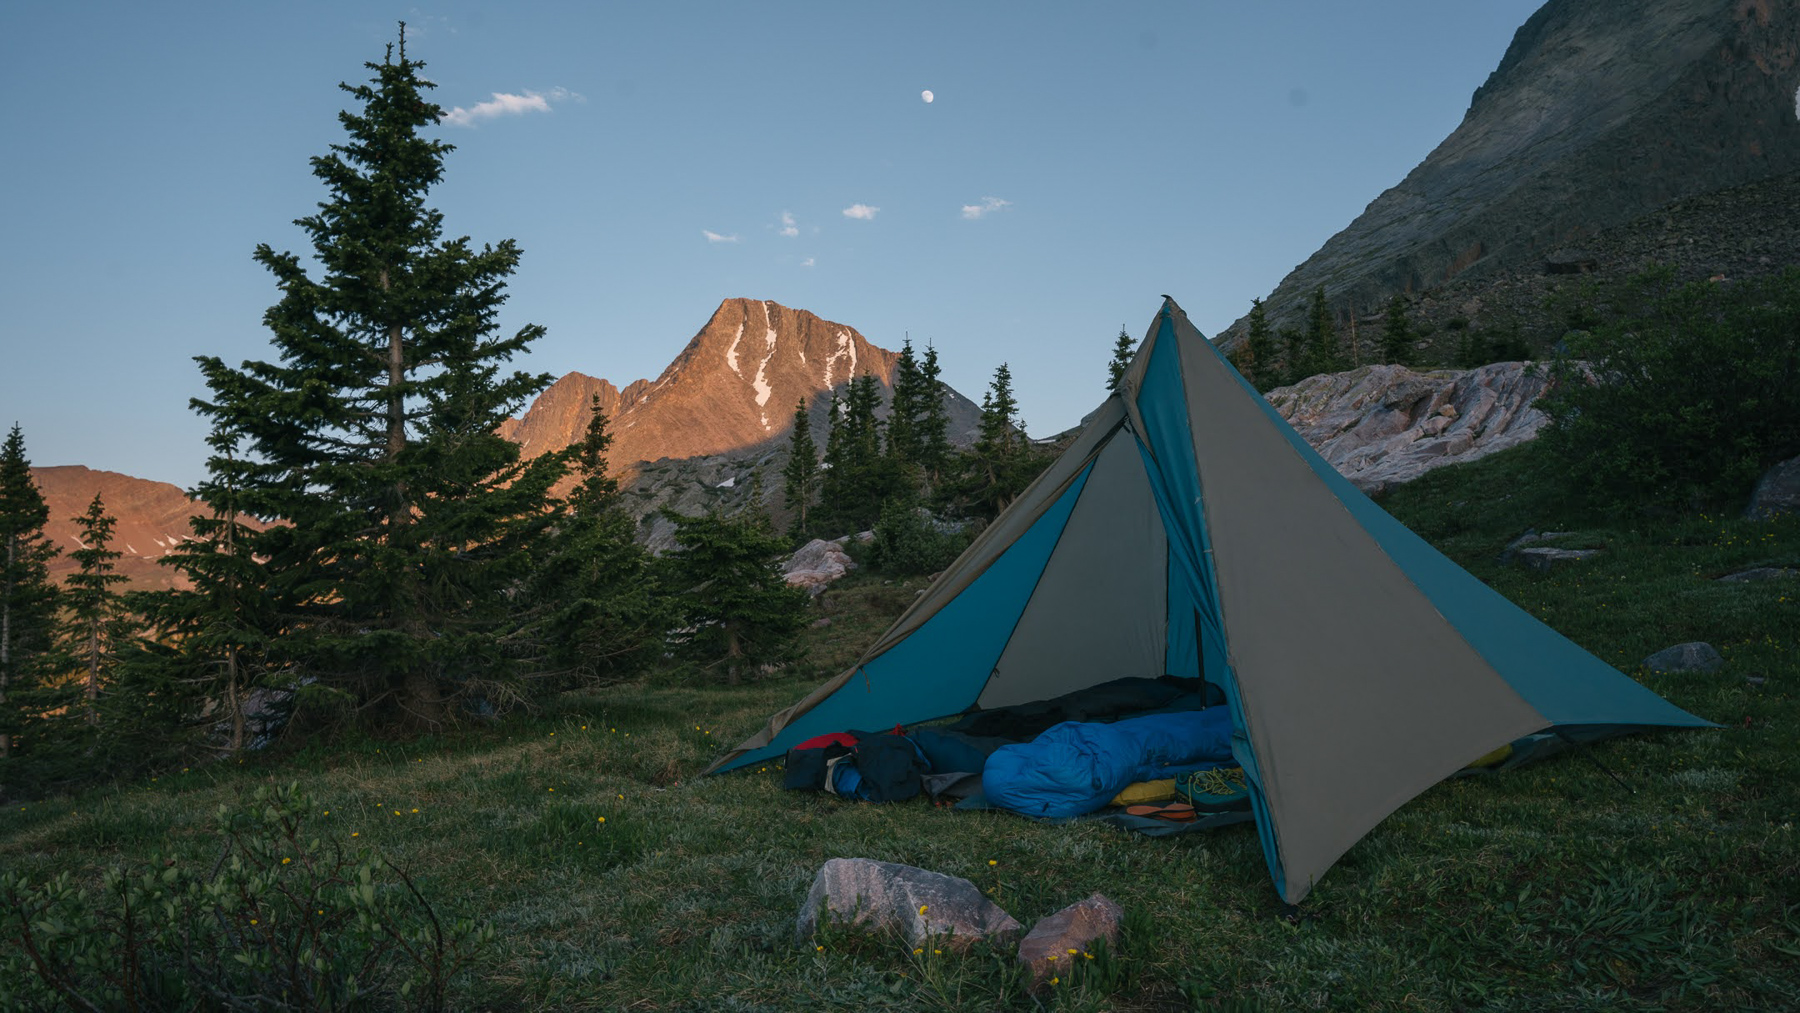 Solo camping: How to spend a night alone under the stars